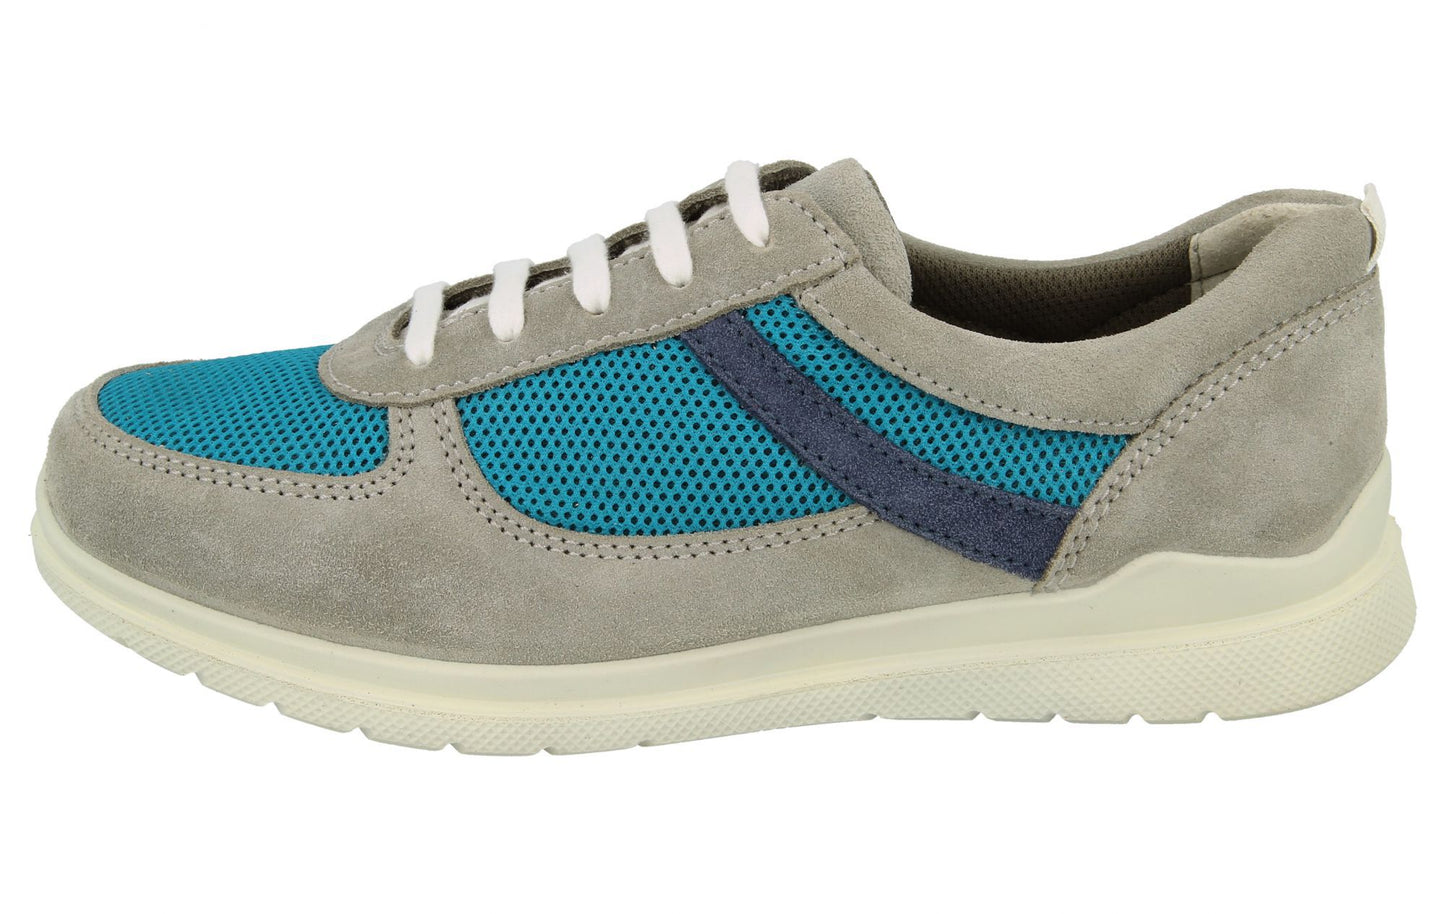 DB Wider Fit Women's Patricia Canvas Casual Shoes Grey Turquoise